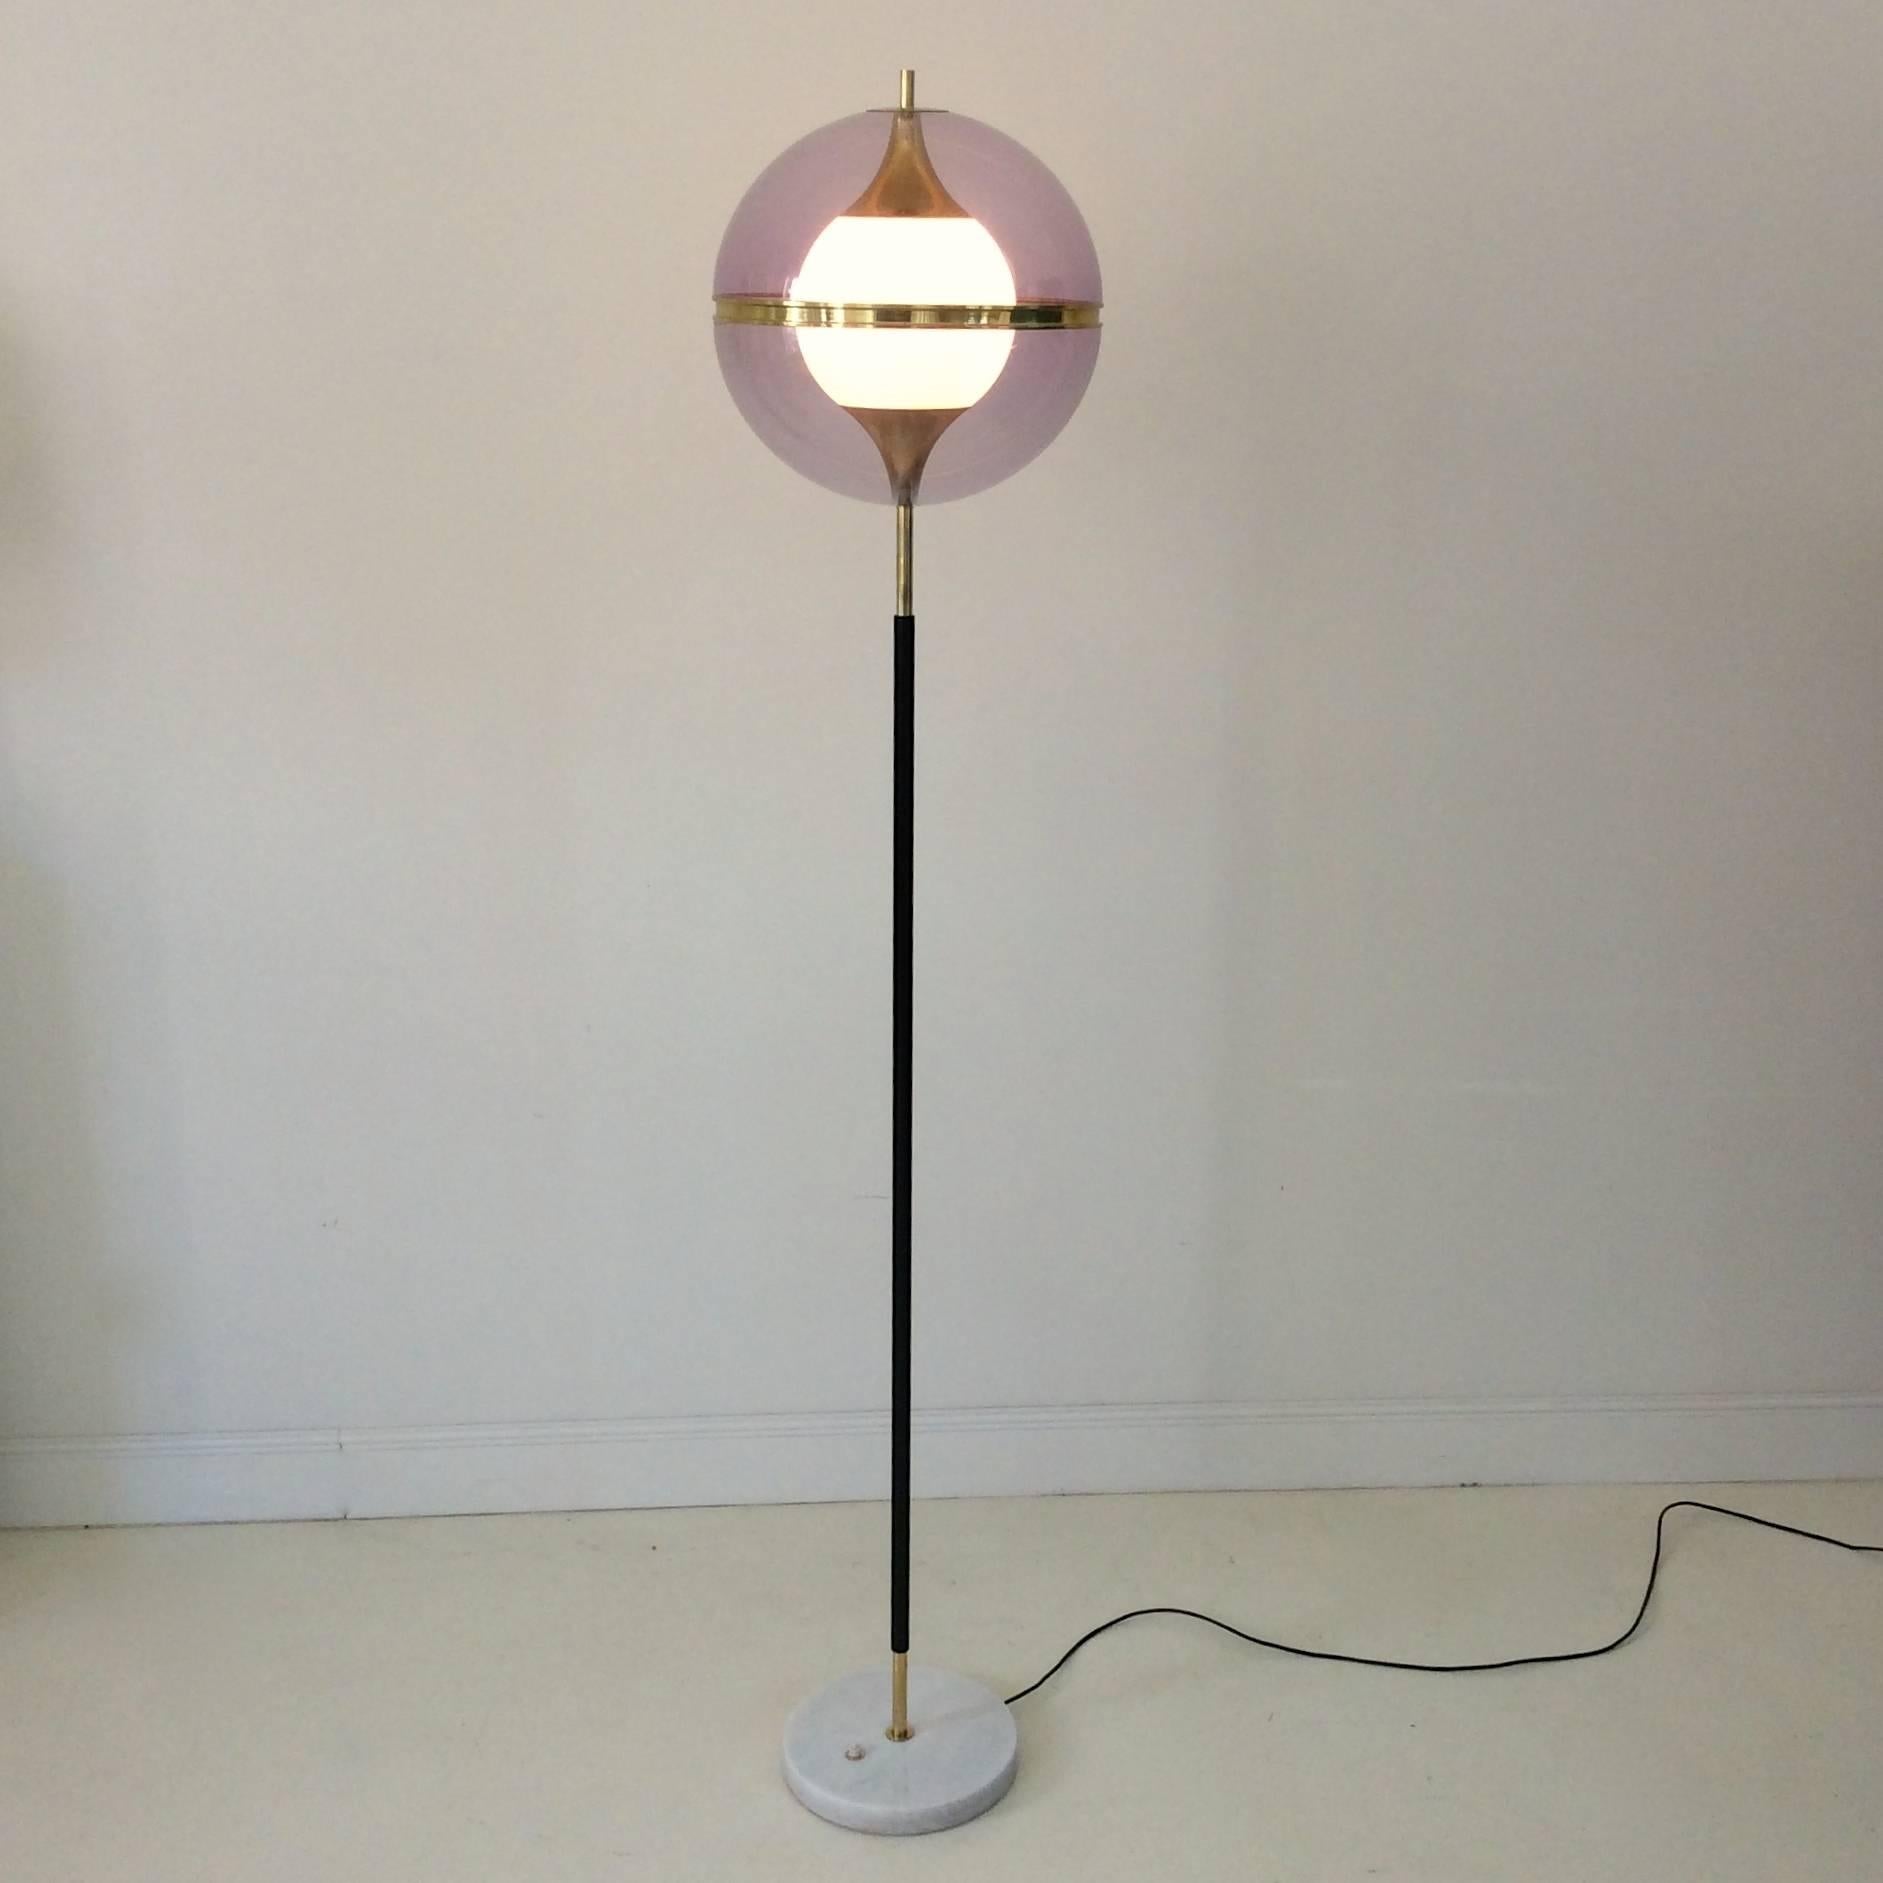 Floor lamp by Stilux, circa 1960, Italy.
Mauve Perspex and white frozed glass, black enameled metal, brass, gold aluminium and marble base.
One E27 bulb of 60 w.
Dimensions: 170 cm height, diameter of the sphere 35 cm, diameter of the base 25